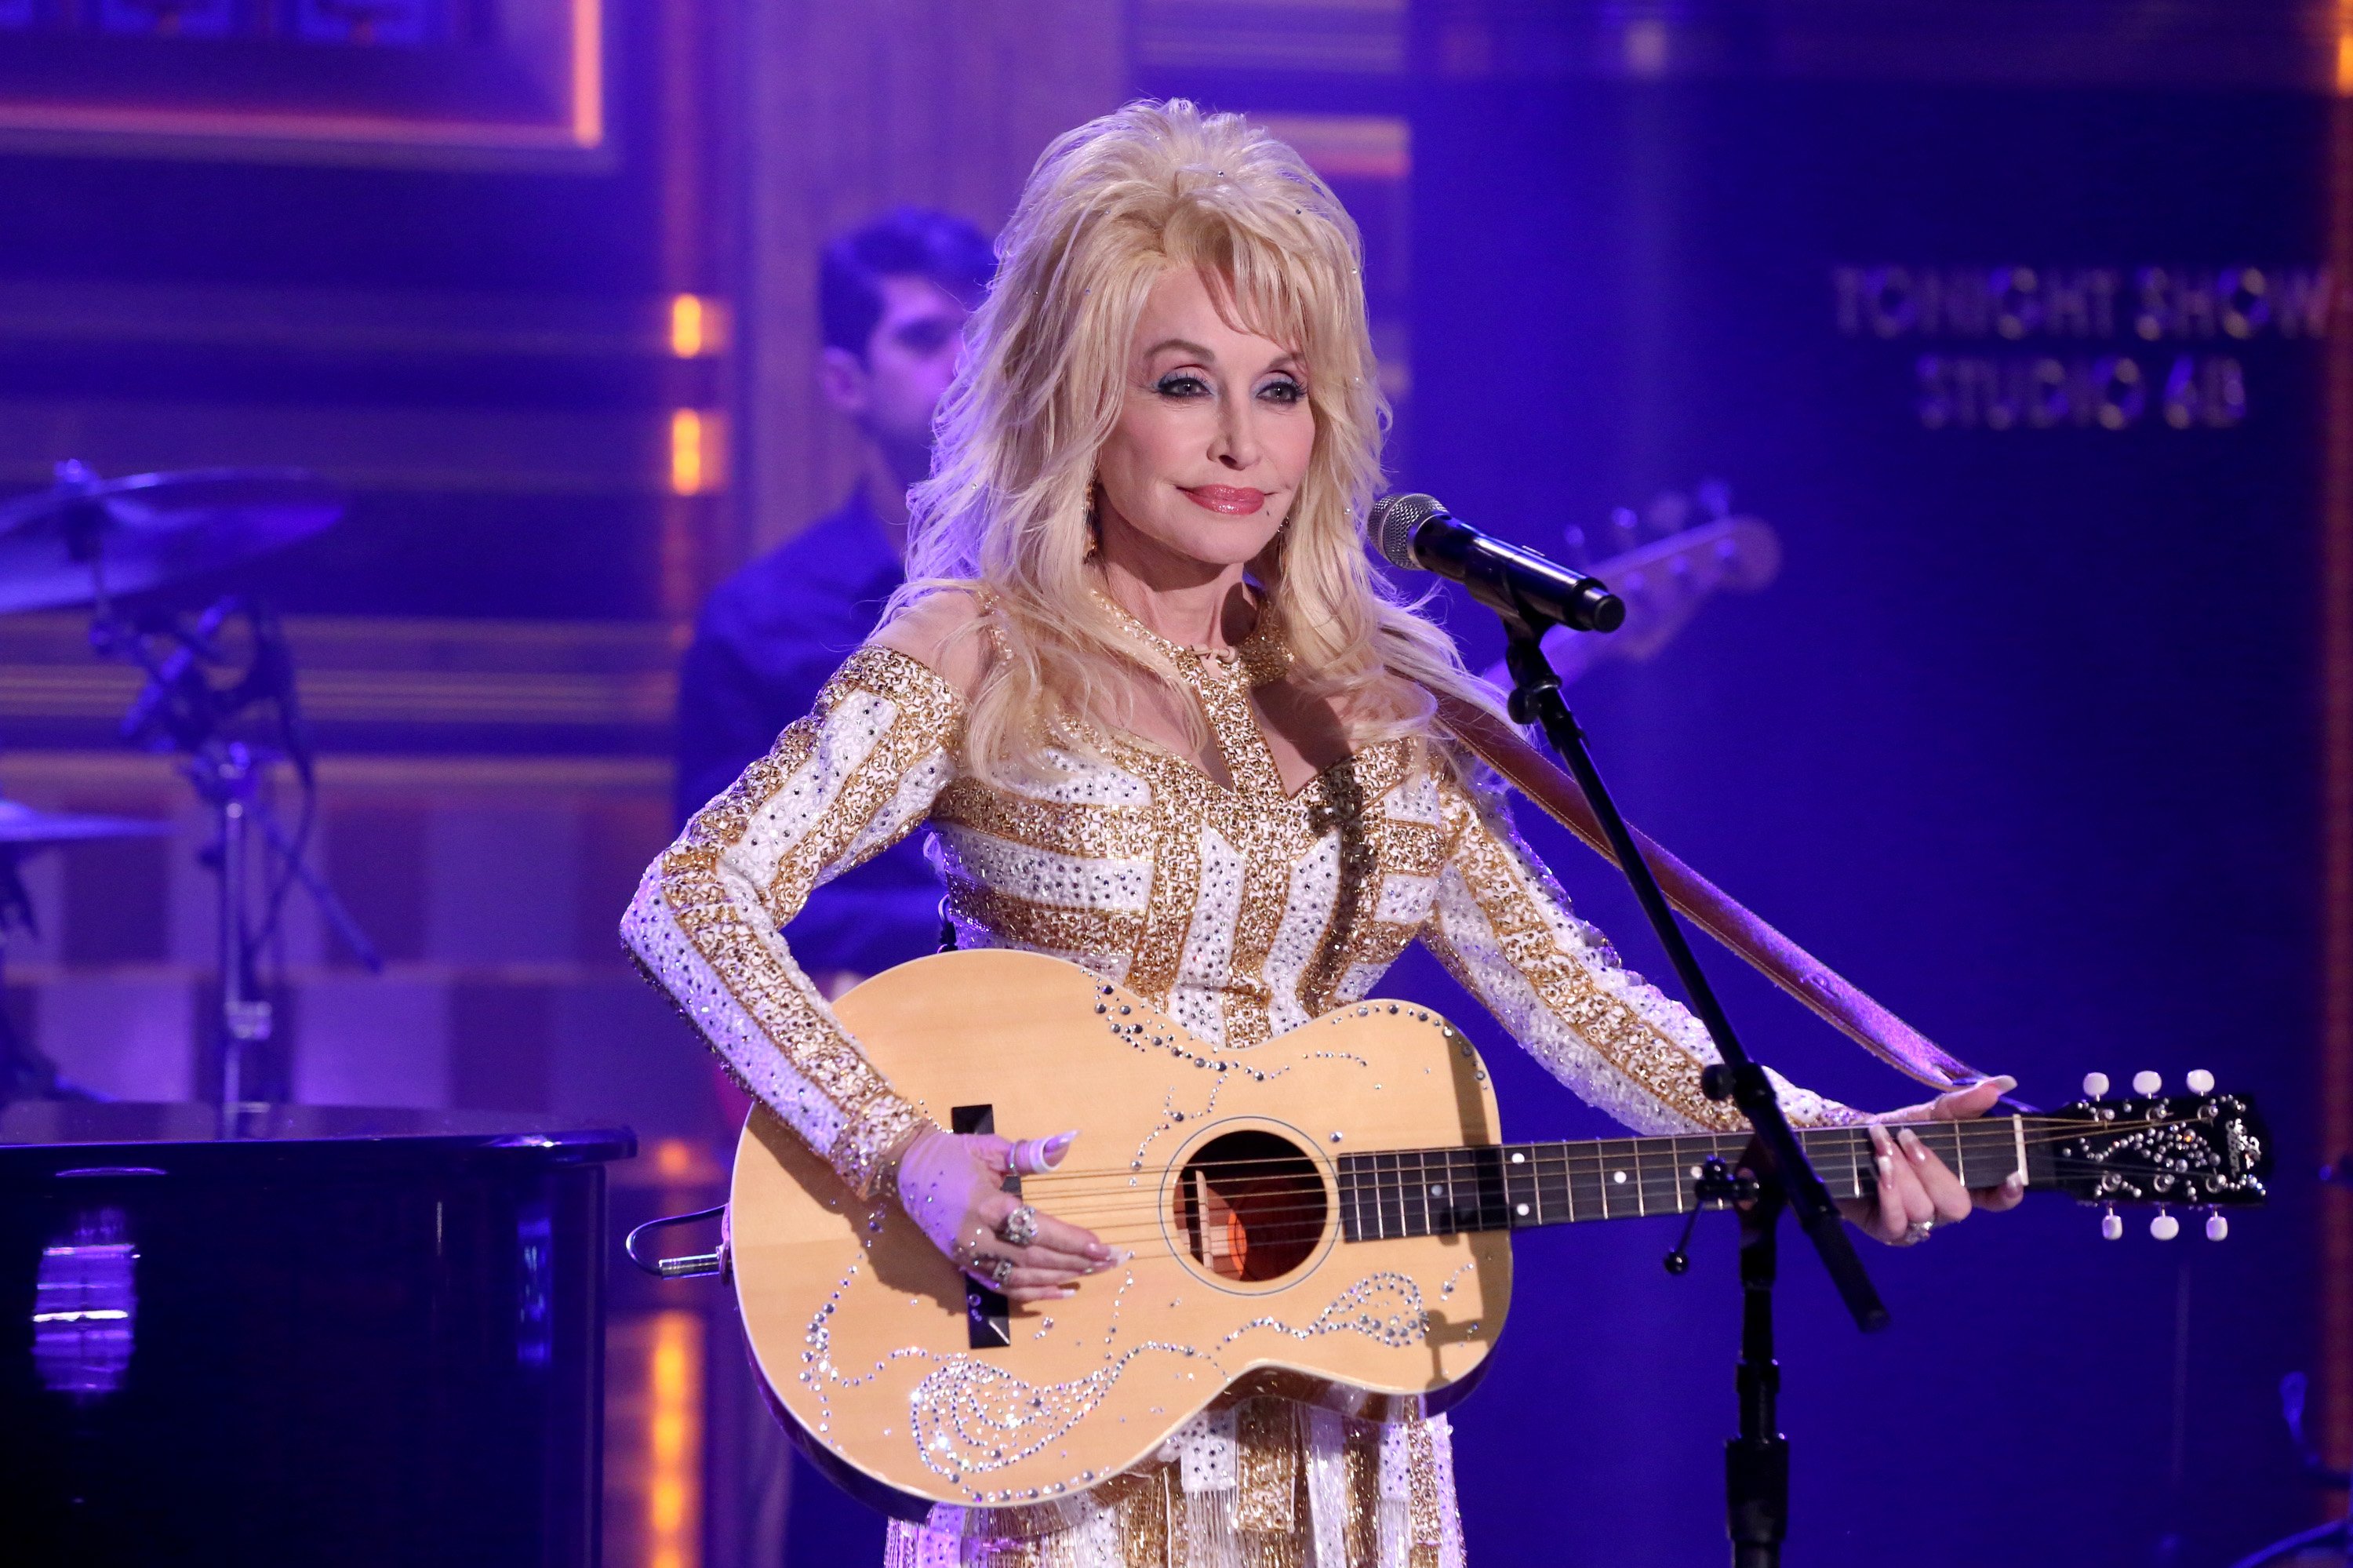 Dolly Parton wears a gold and white dress while playing guitar.